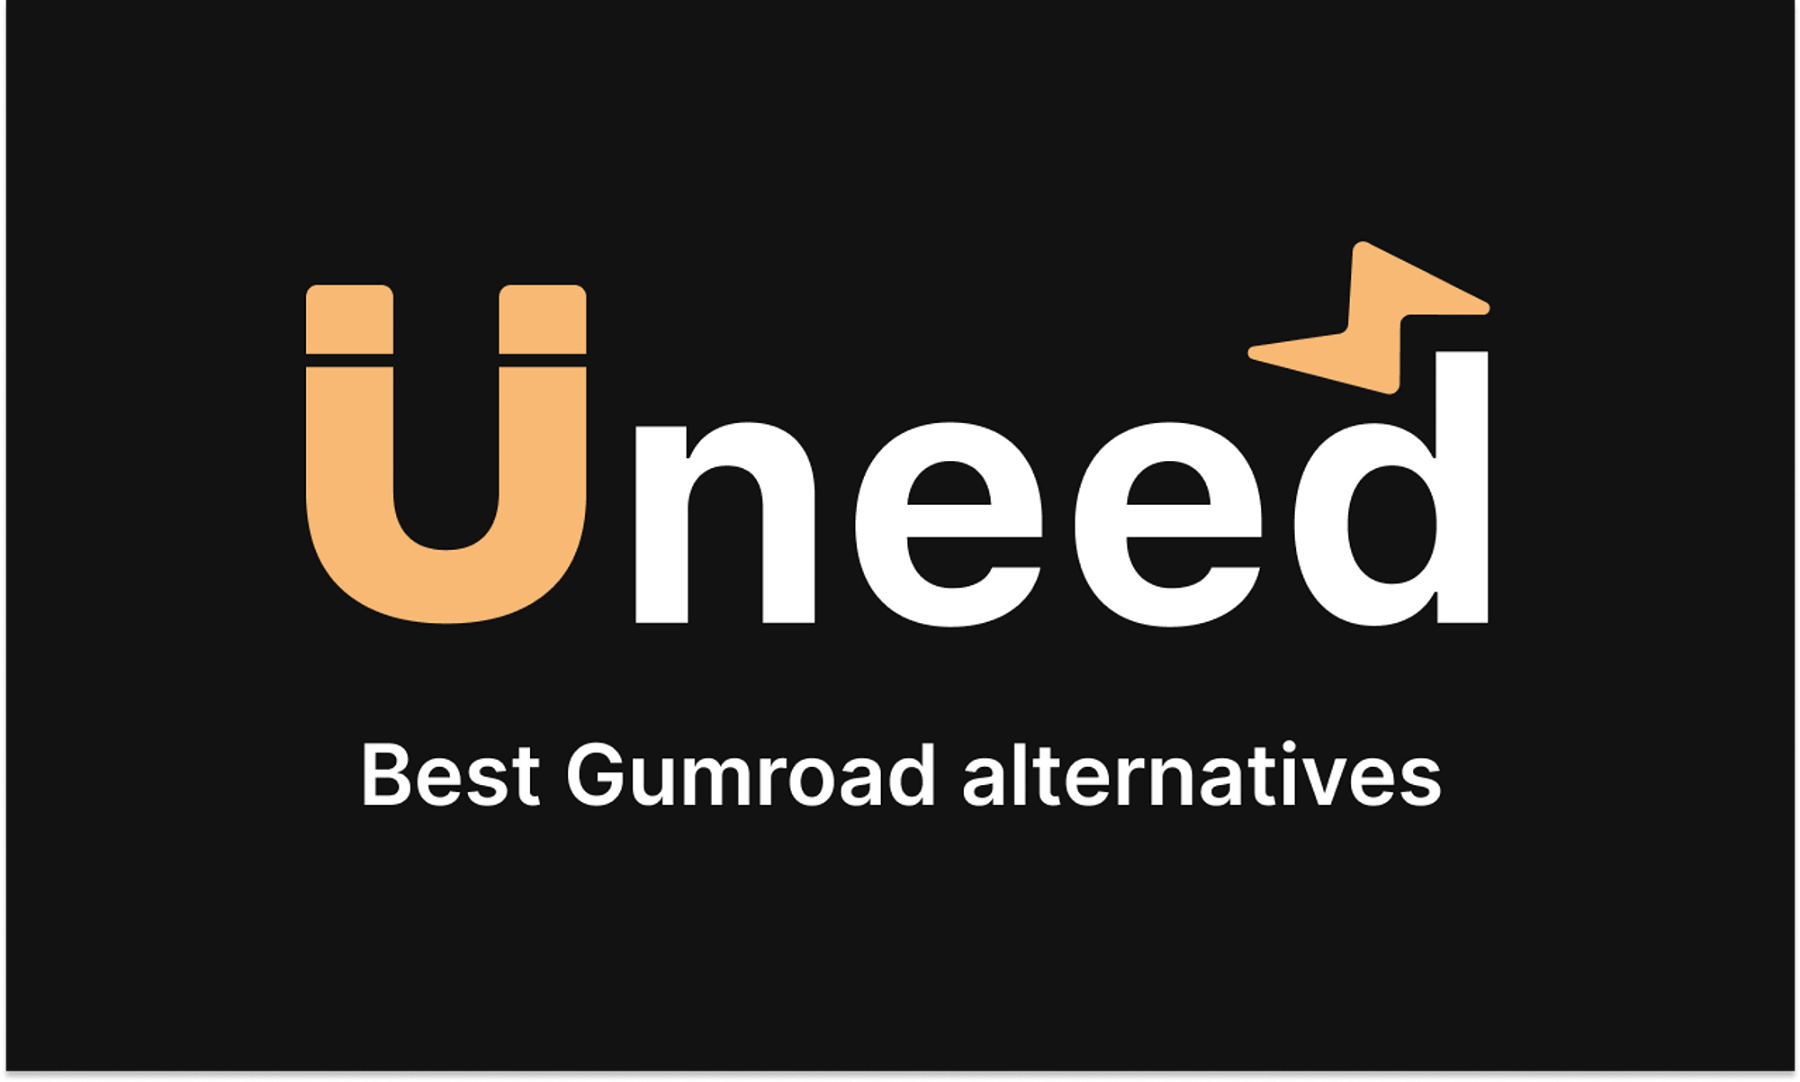 The best alternatives to Gumroad in 2023